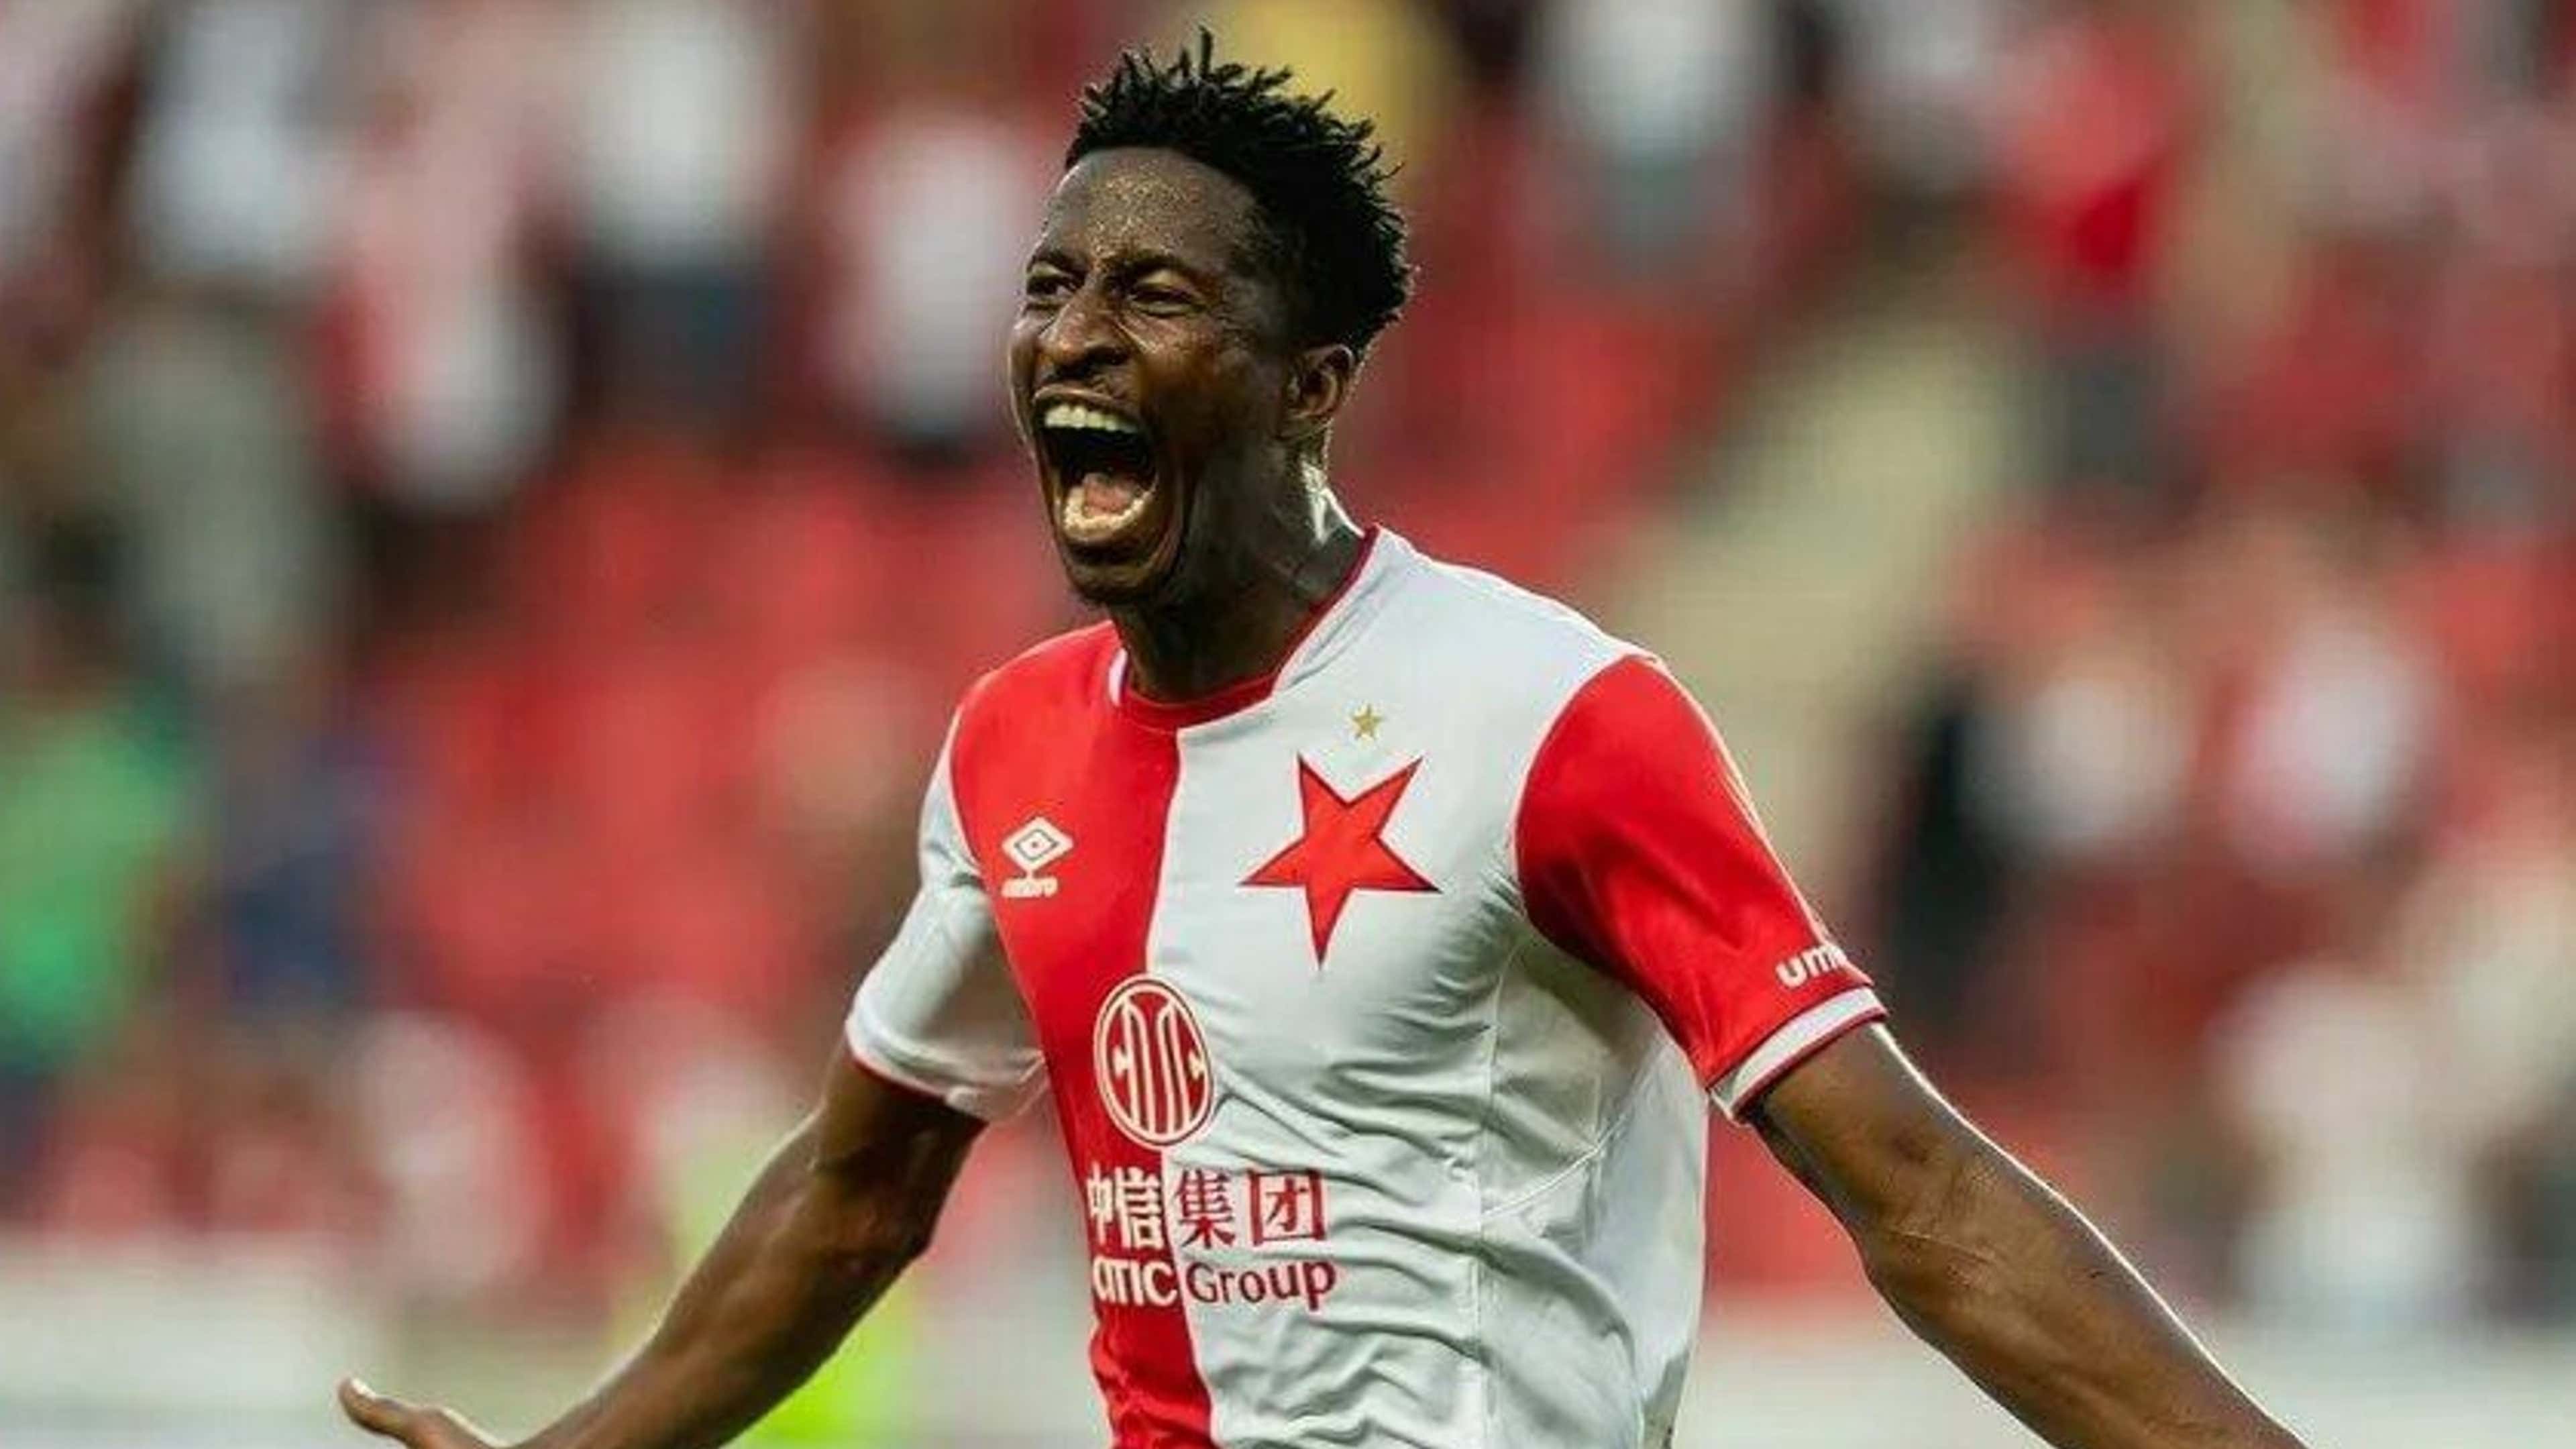 OFFICIAL: Slavia Praha have completed the signing of Nigerian